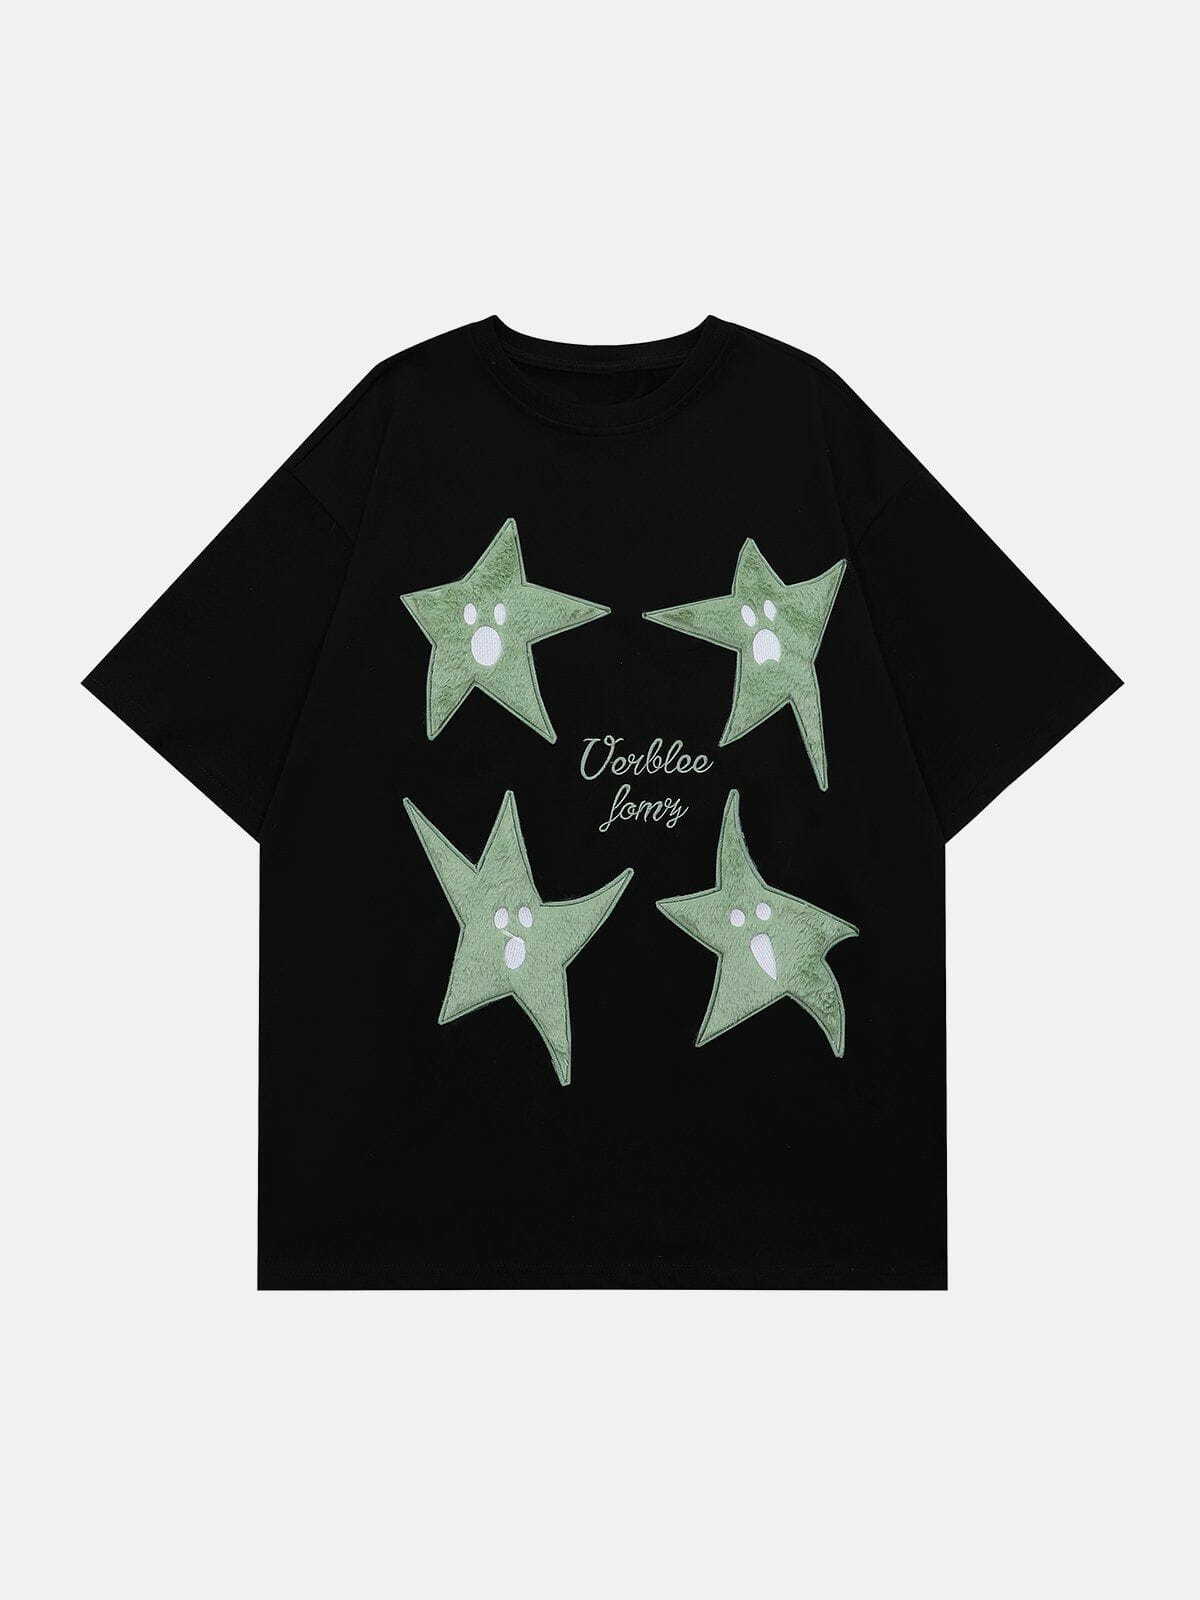 retro ghost star print tee edgy streetwear for a bold  vibrant look 6265